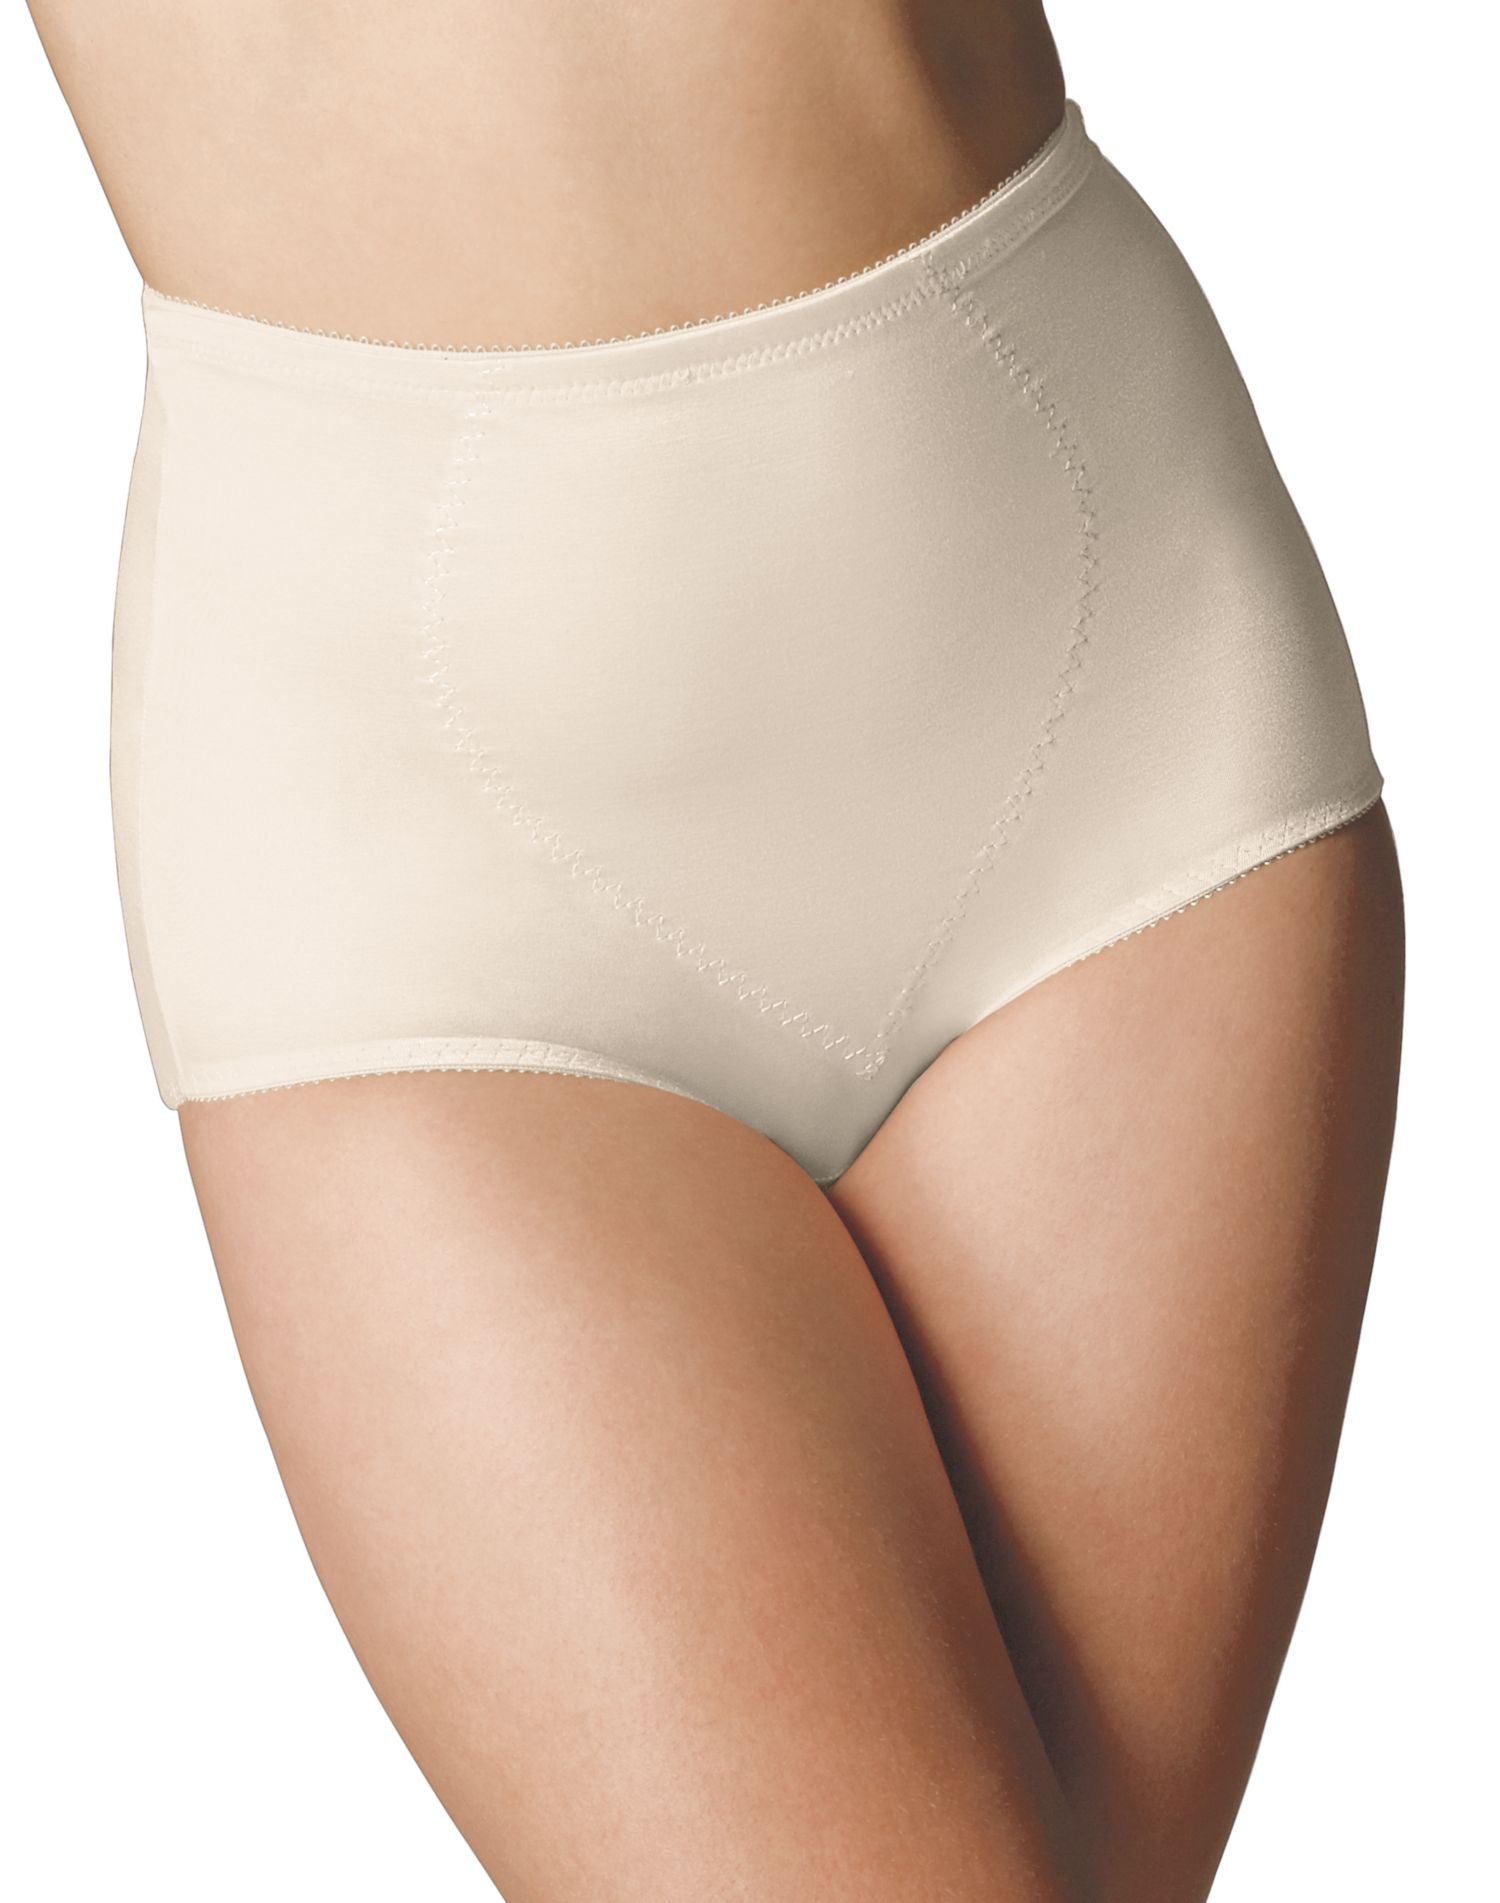 Hanes Women’s Shaping Brief Pack, 100% Cotton Lining, 2-Pack Light Beige M